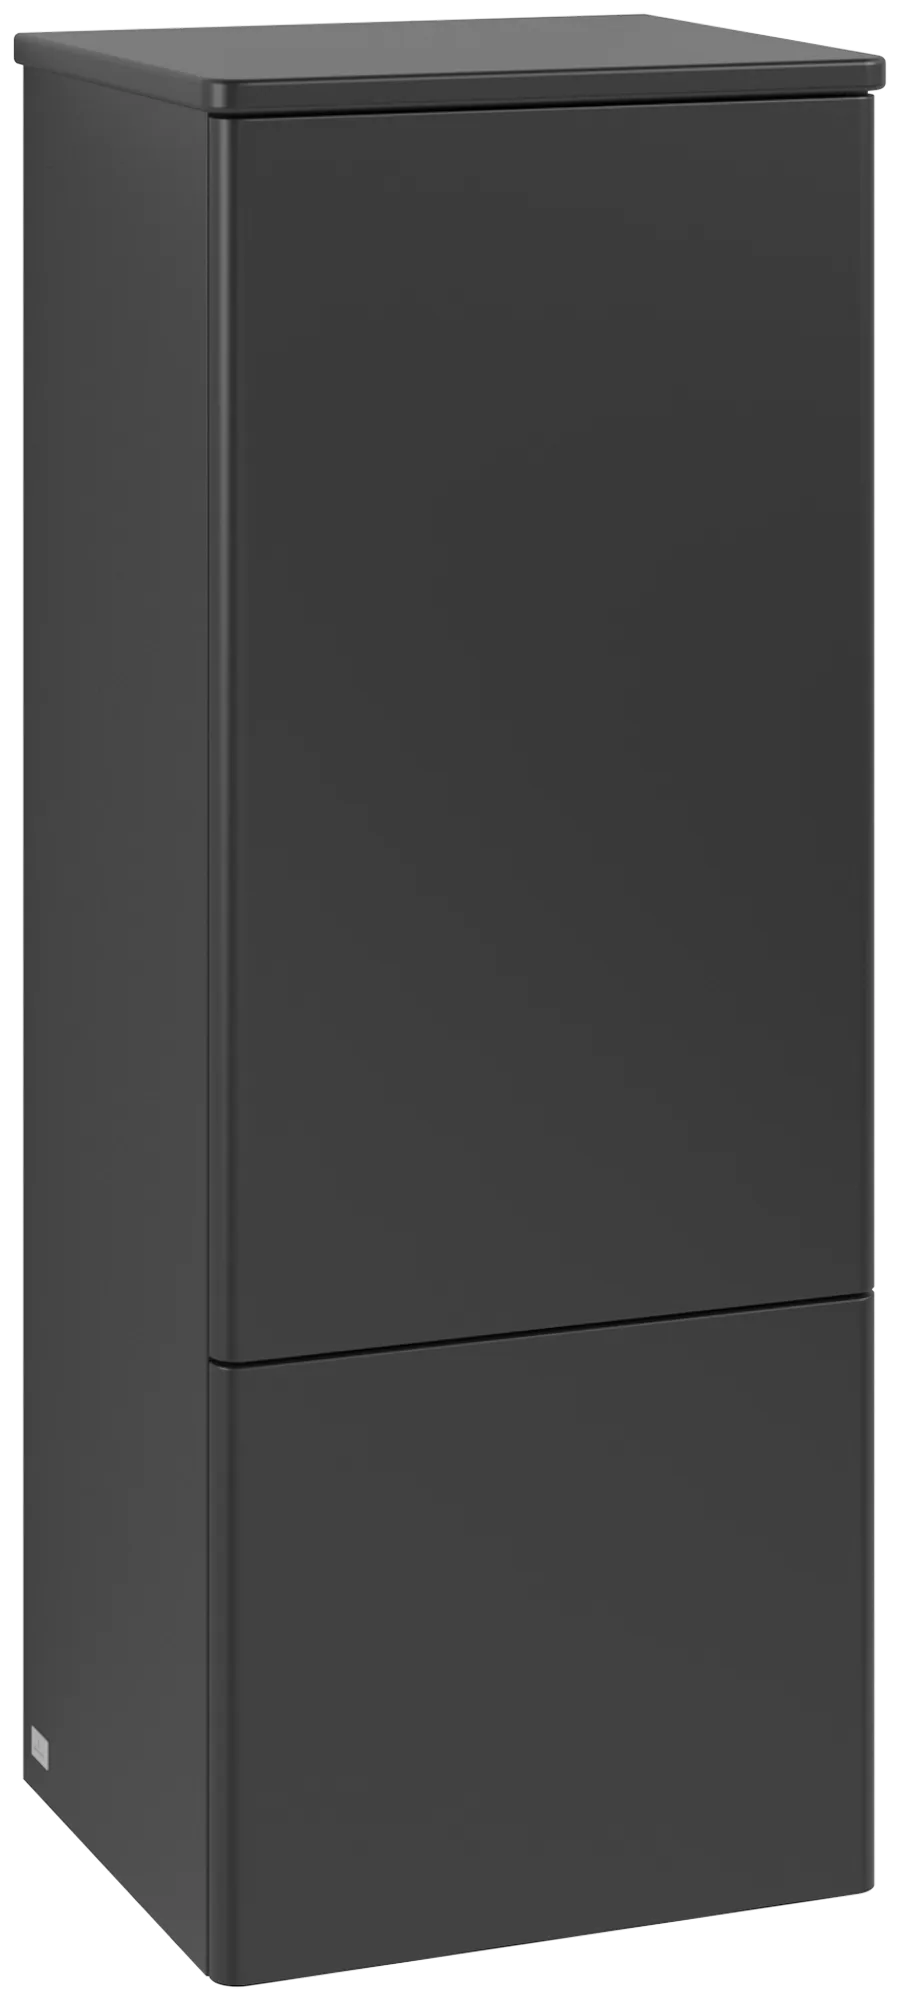 Picture of VILLEROY BOCH Antao Medium-height cabinet, 1 door, 414 x 1039 x 356 mm, Front without structure, Black Matt Lacquer / Black Matt Lacquer #K44000PD